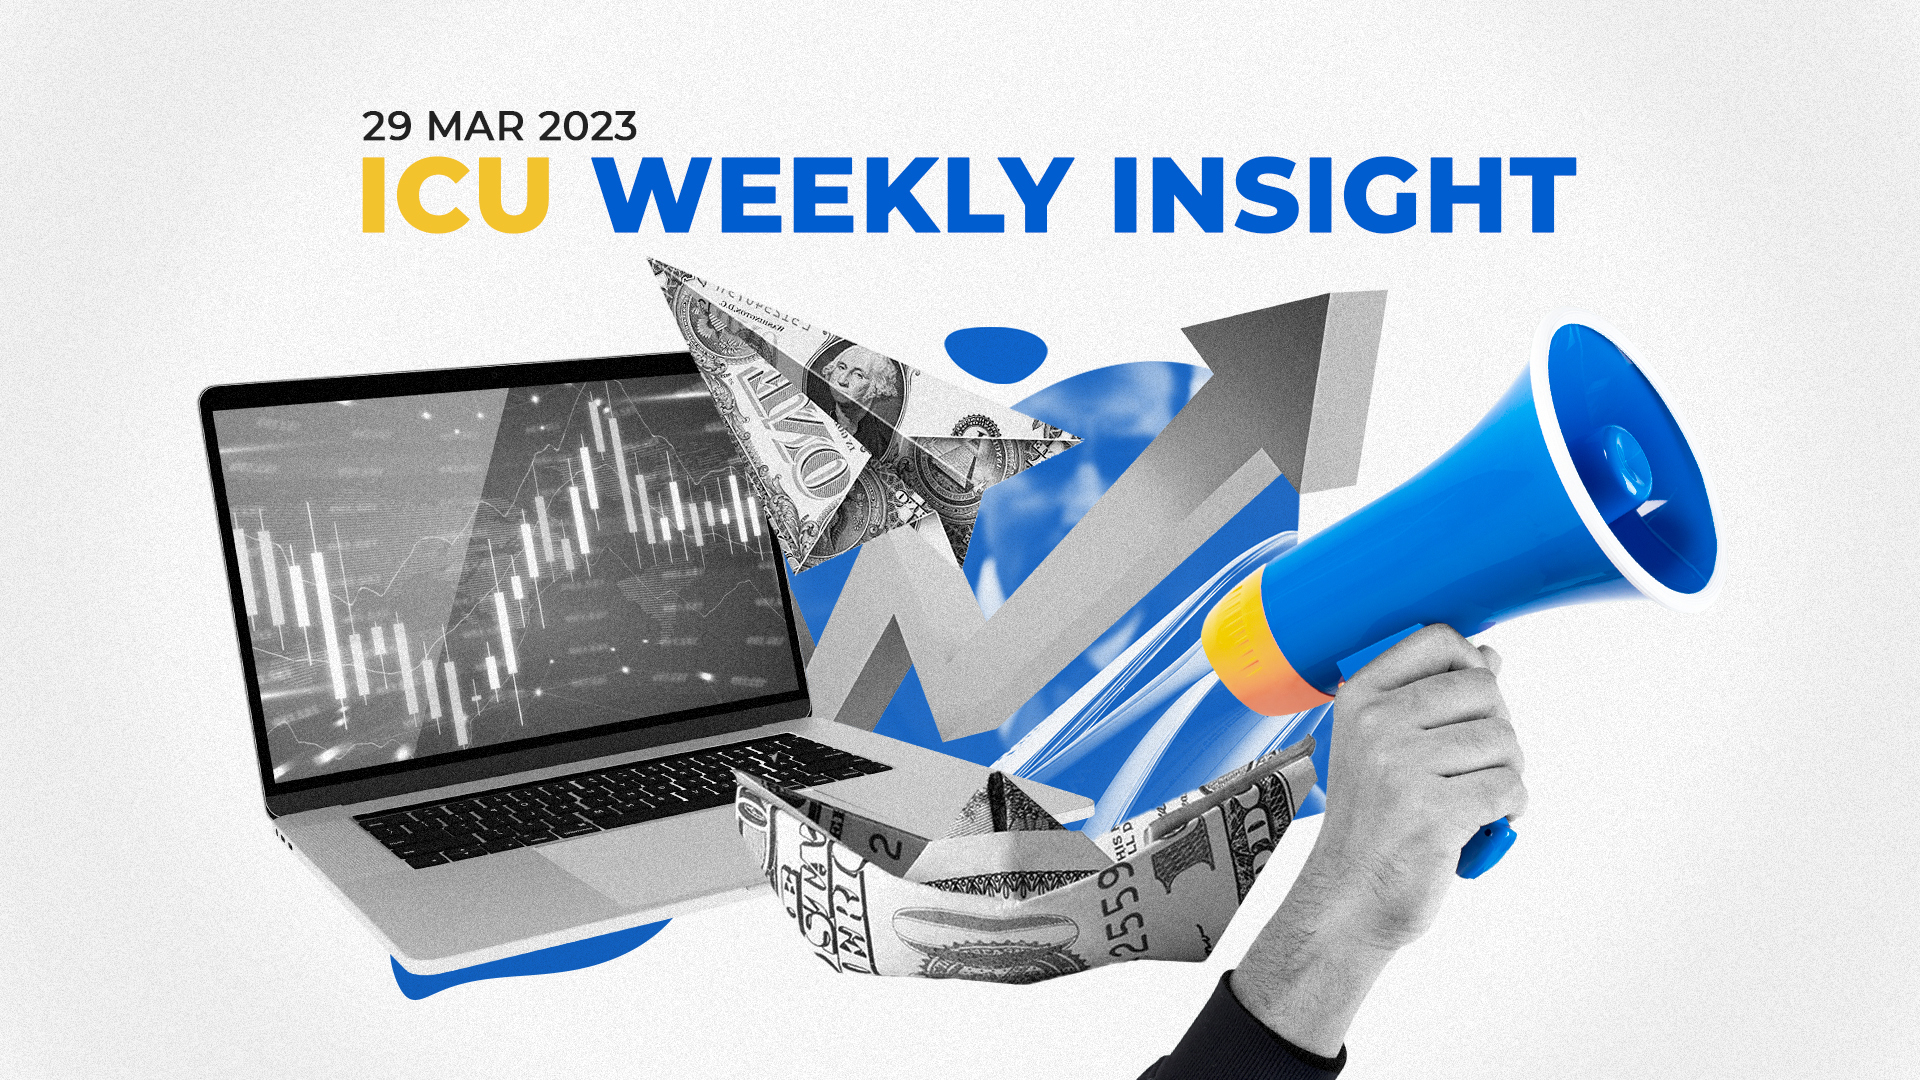 ICU Weekly Insight: Wednesday, 29 March 2023